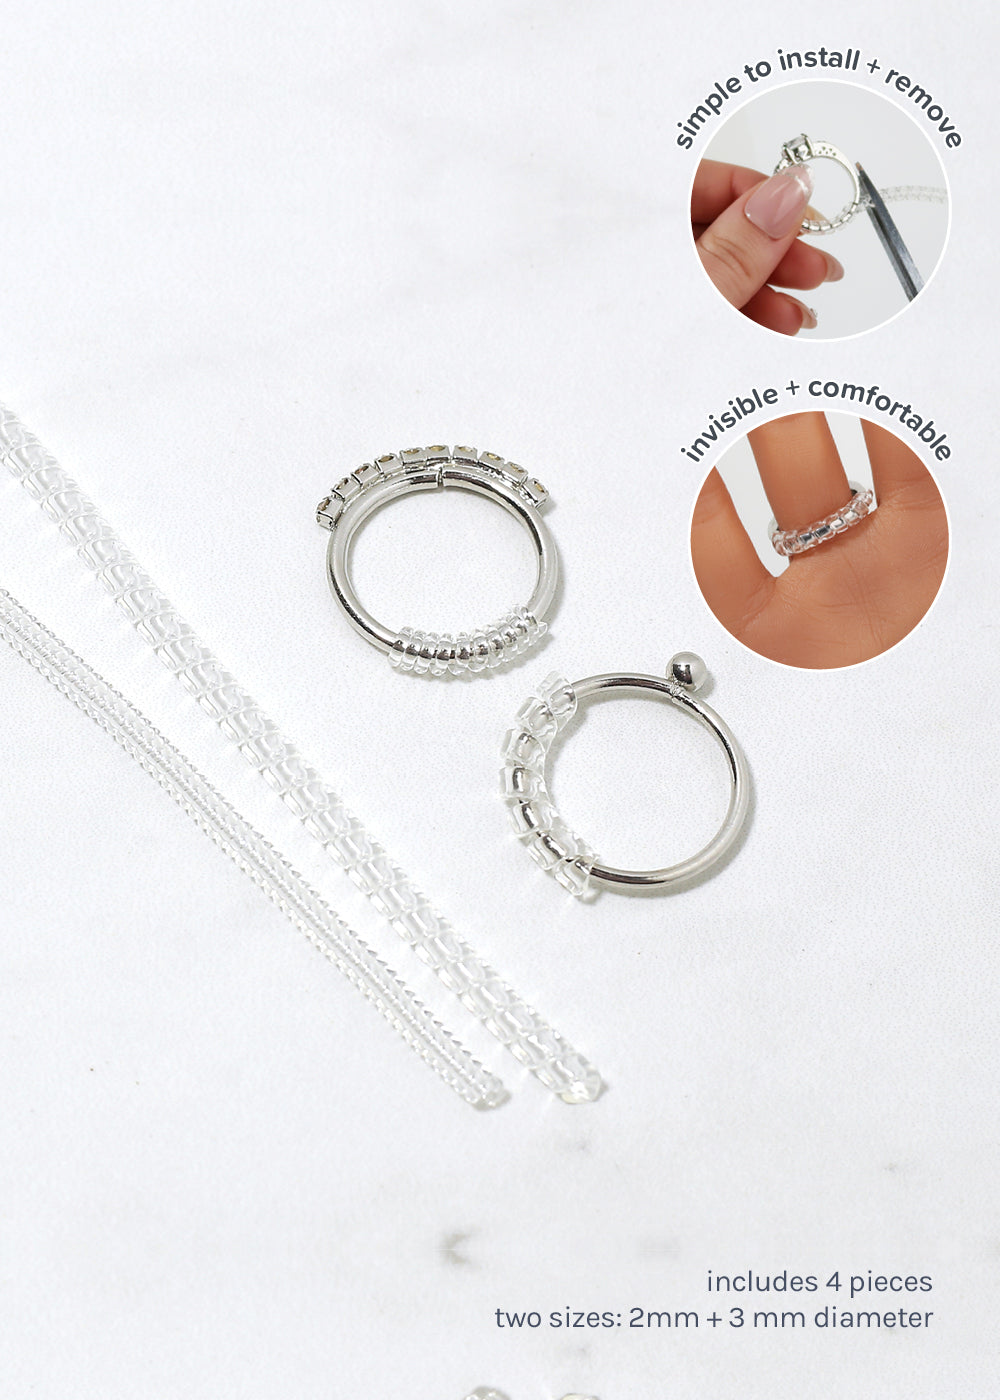 Invisible Ring Size Adjuster for Loose Rings Ring Singapore